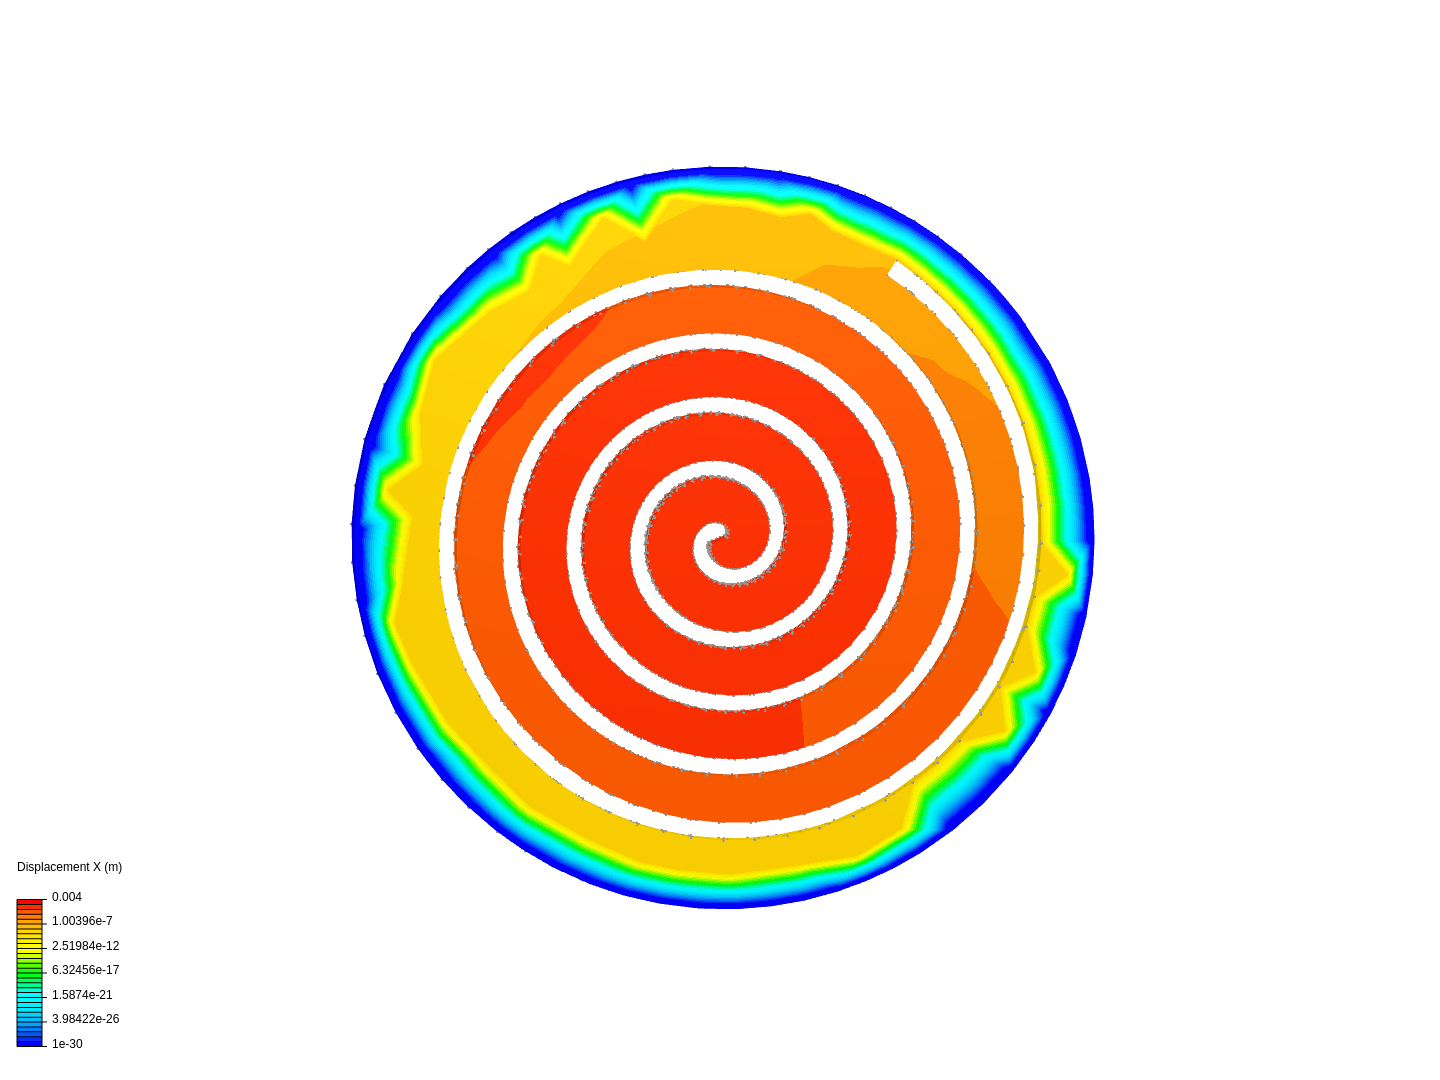 fea sprial image